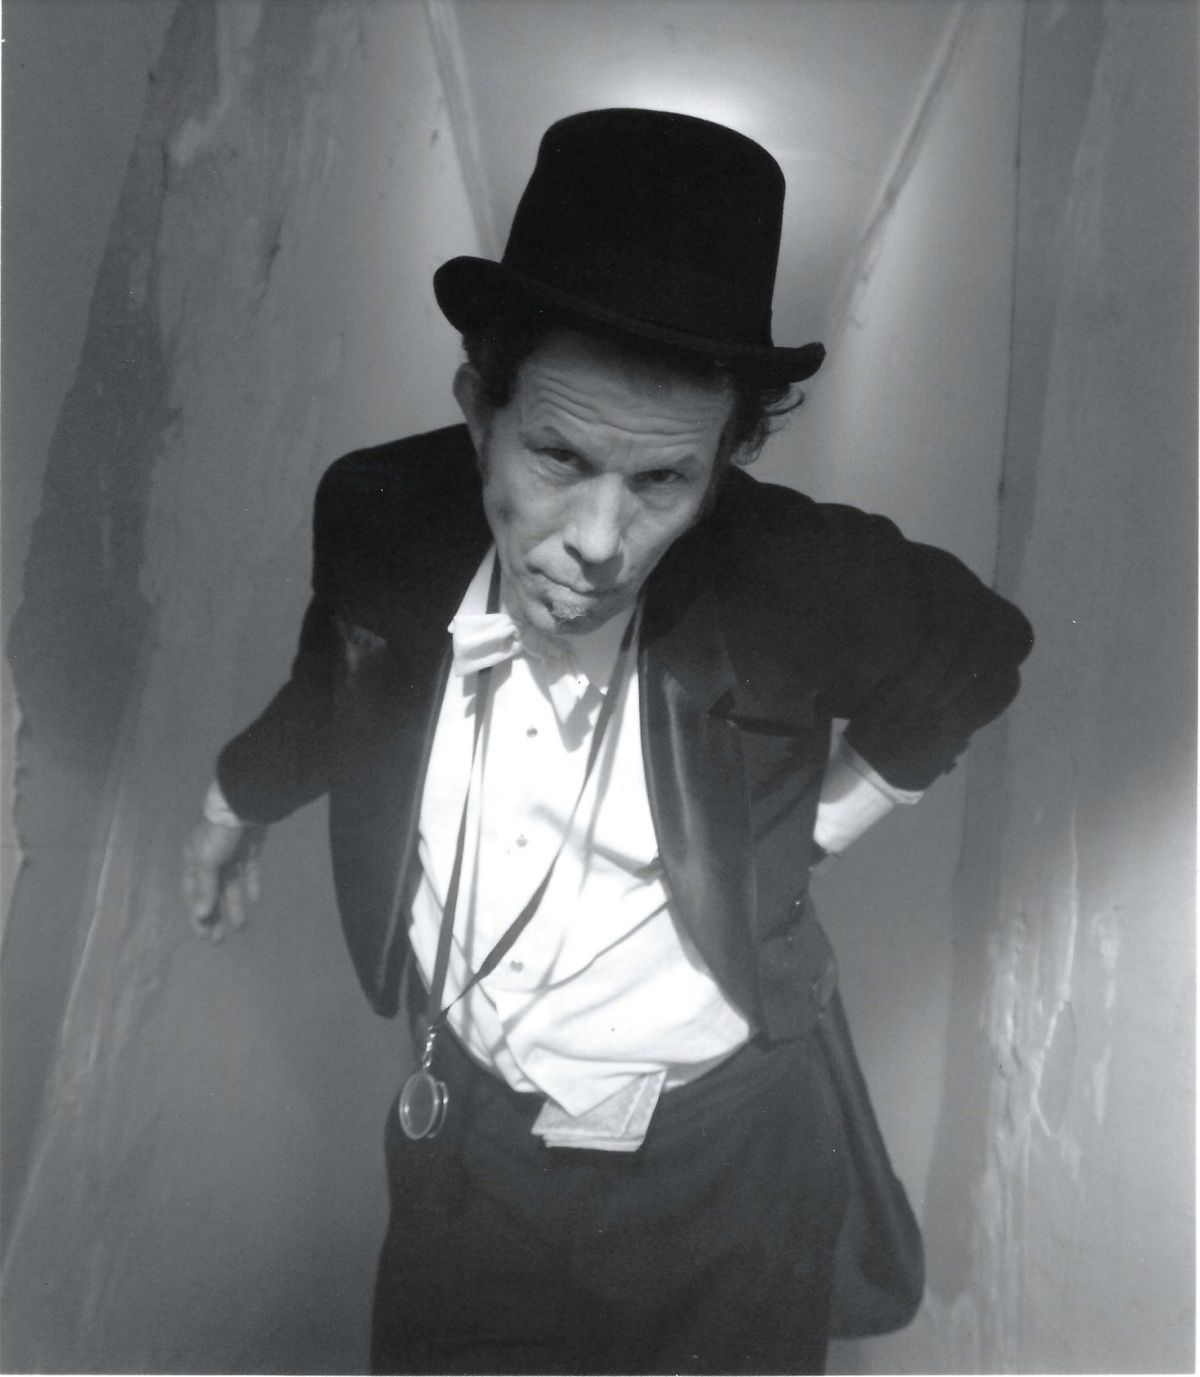 Chasing Tom Waits—Or the Quest for Creative Identity